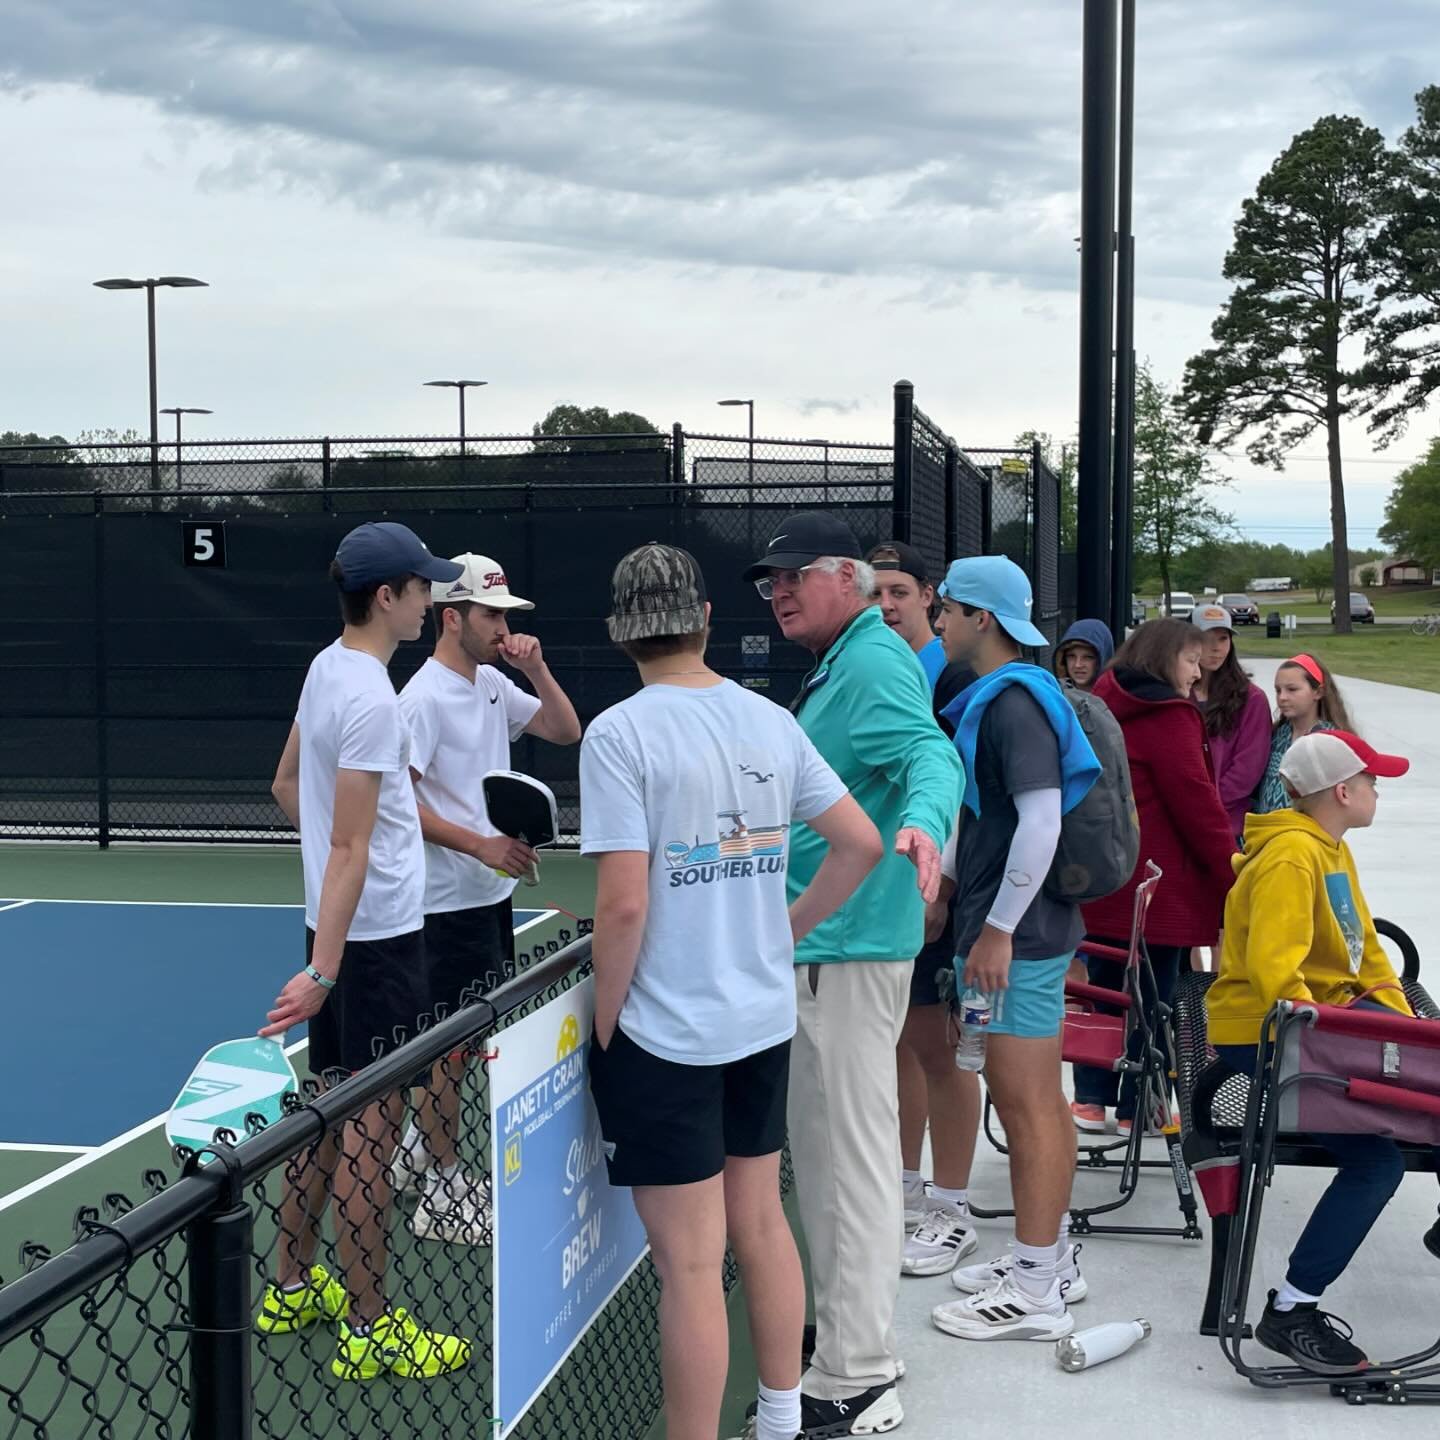 Searcy KLIFE is for the community and we are so grateful to have seen the community show up for our tournament! It is an honor to get to partner with those in the community to make disciples for Christ!